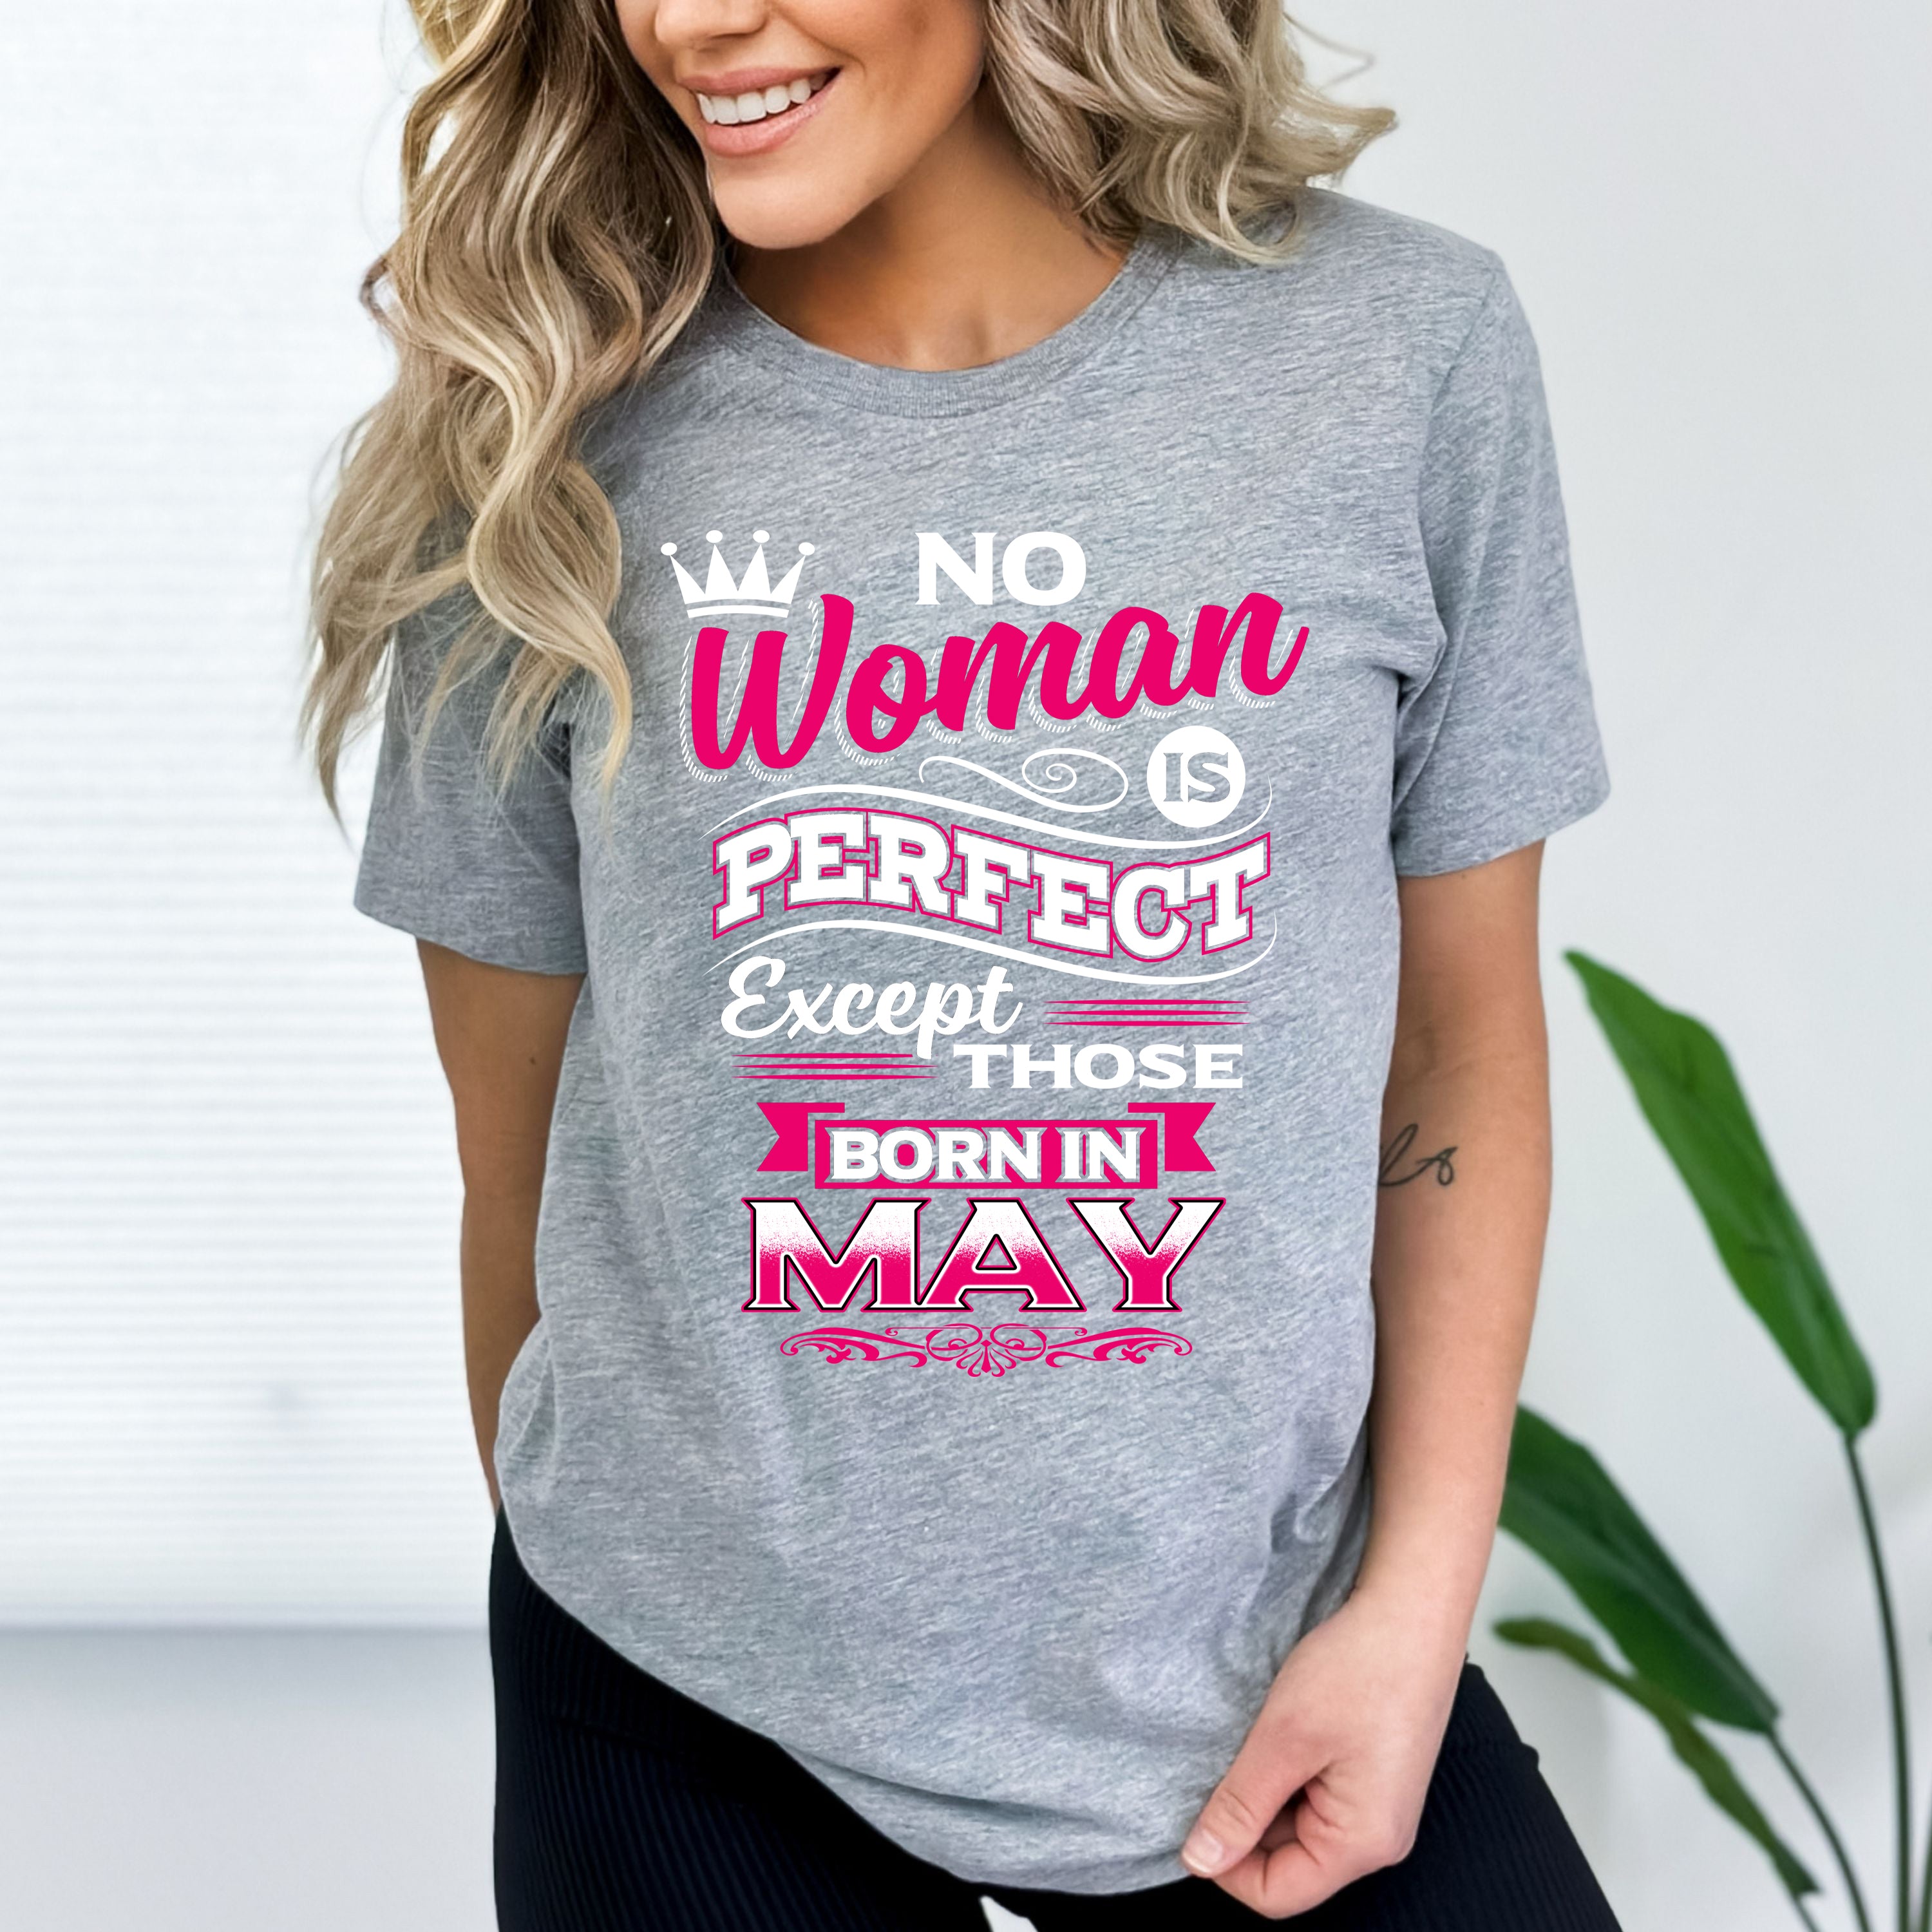 "No Woman Is Perfect Except Those Born In May"